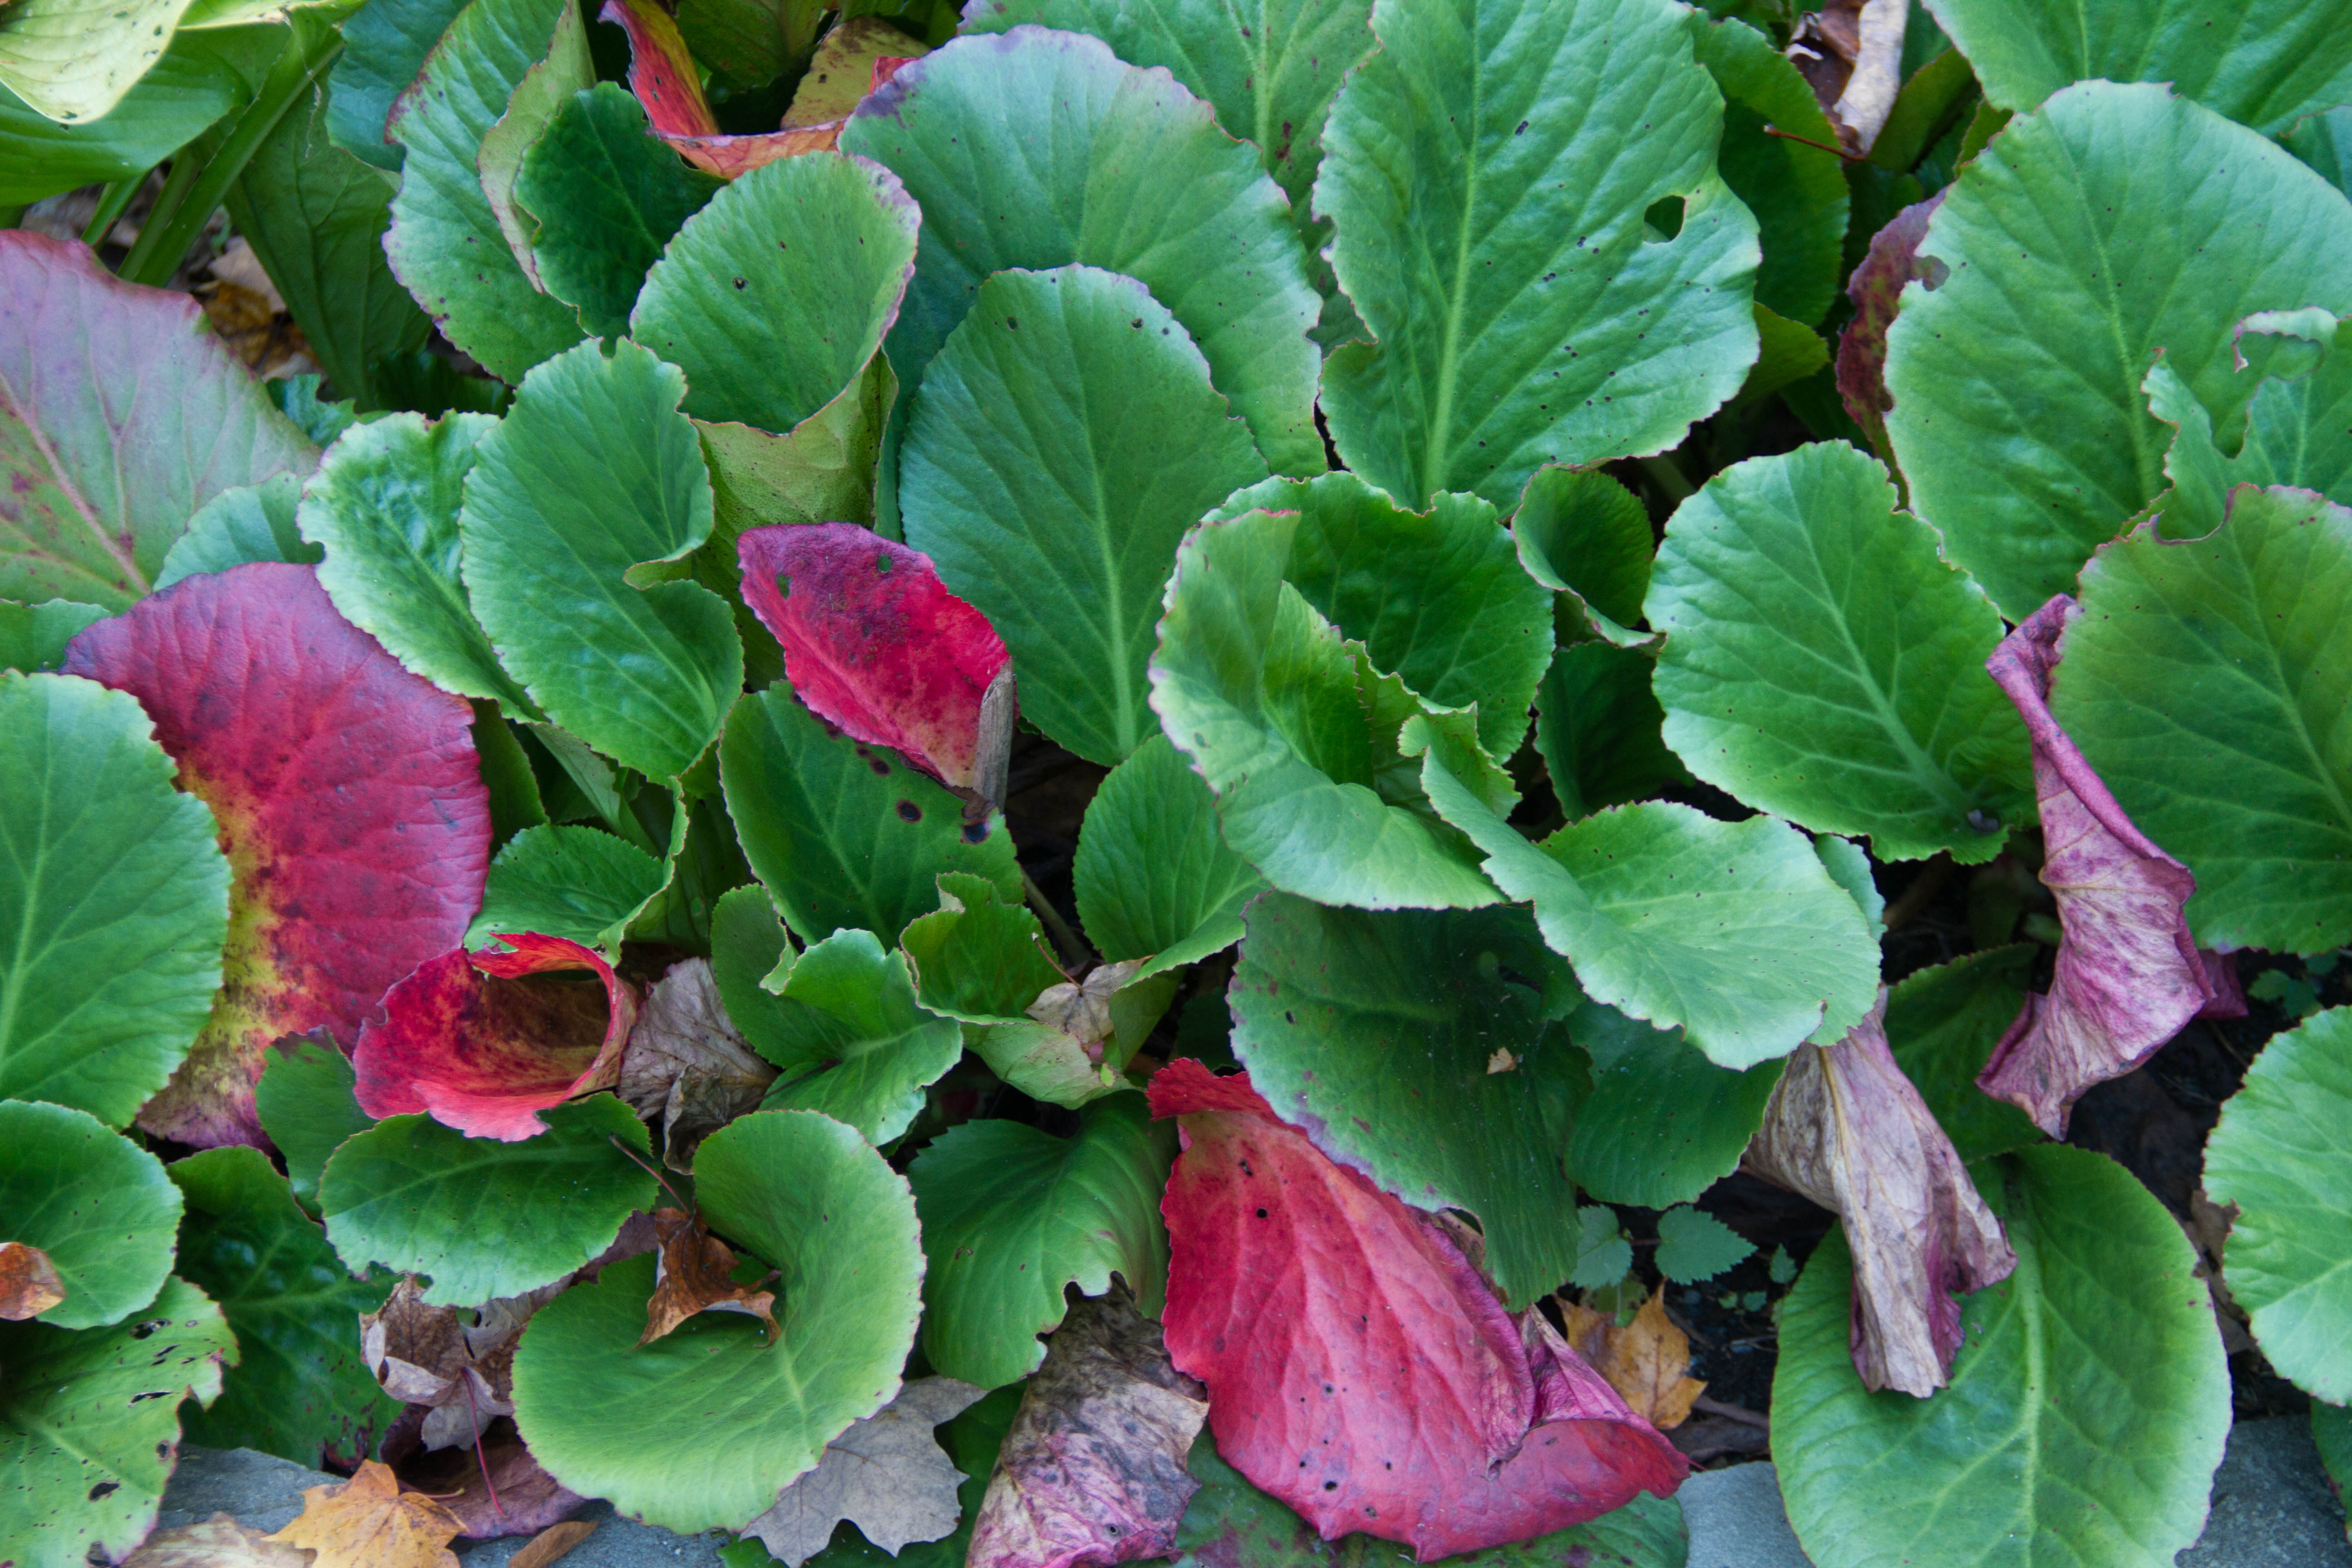 Bergenia leaves present themselves as Christmas colours, red and green.